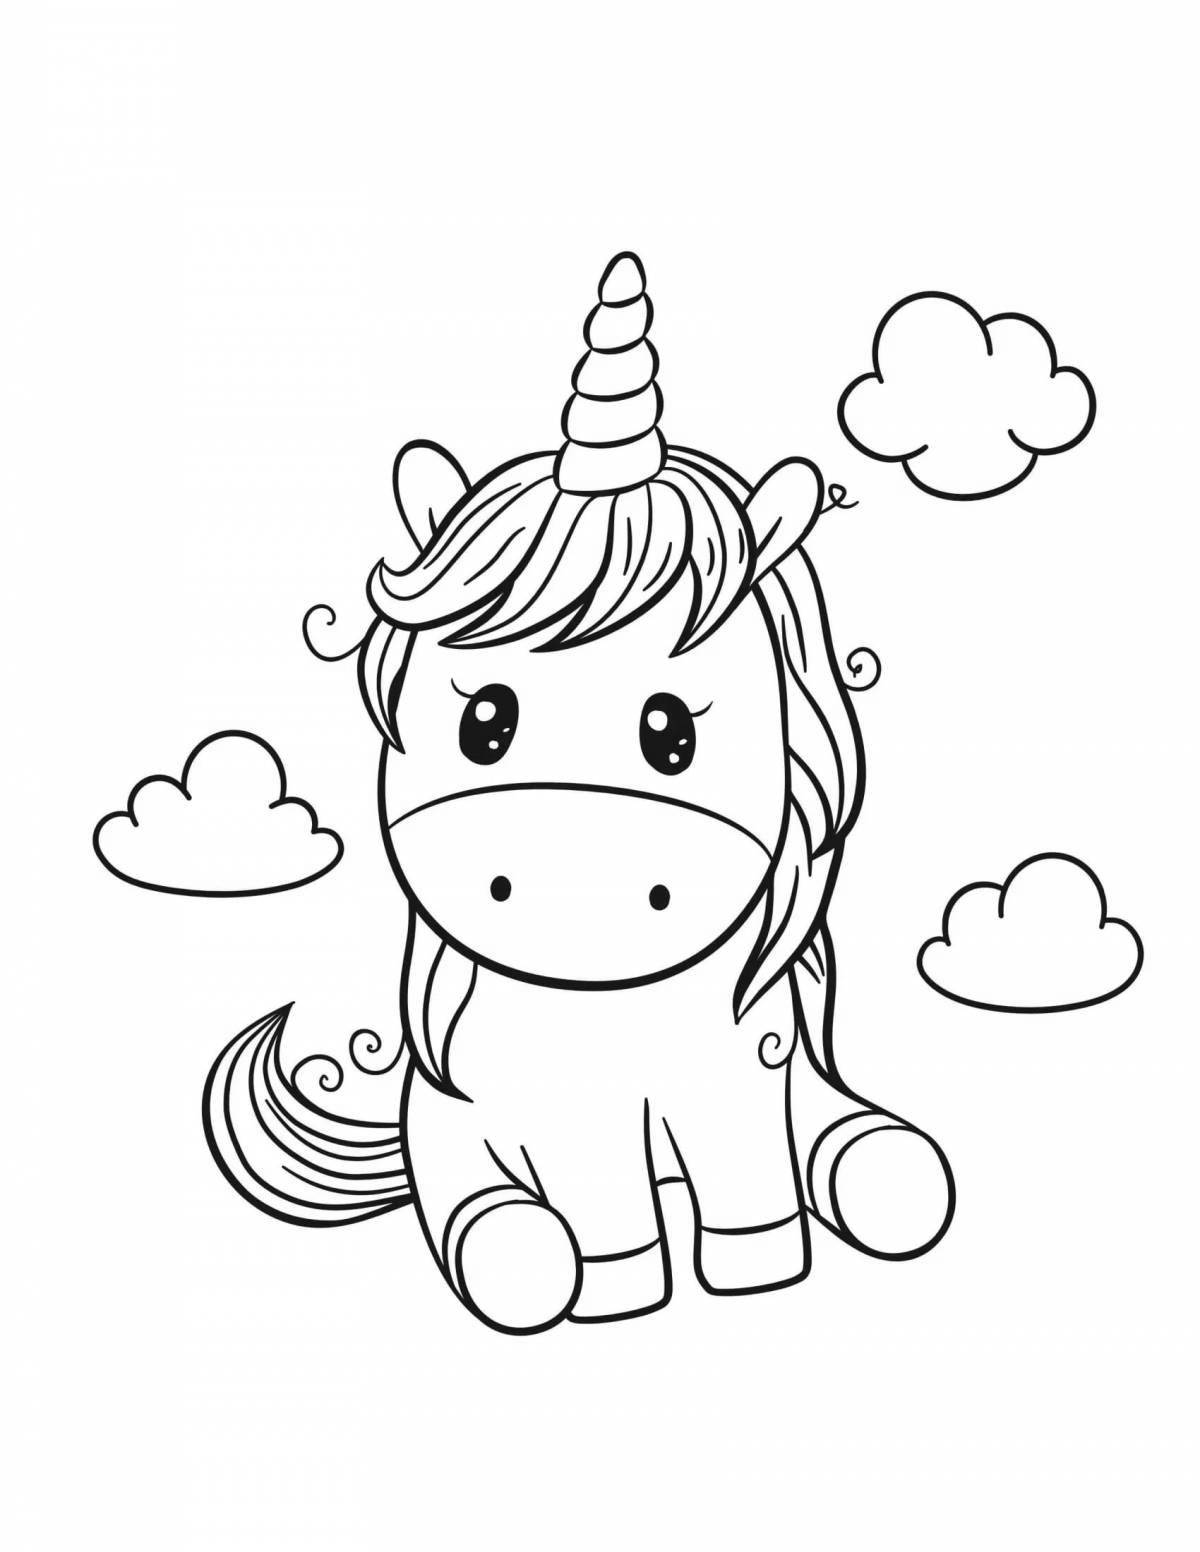 Blissful unicorn coloring pages